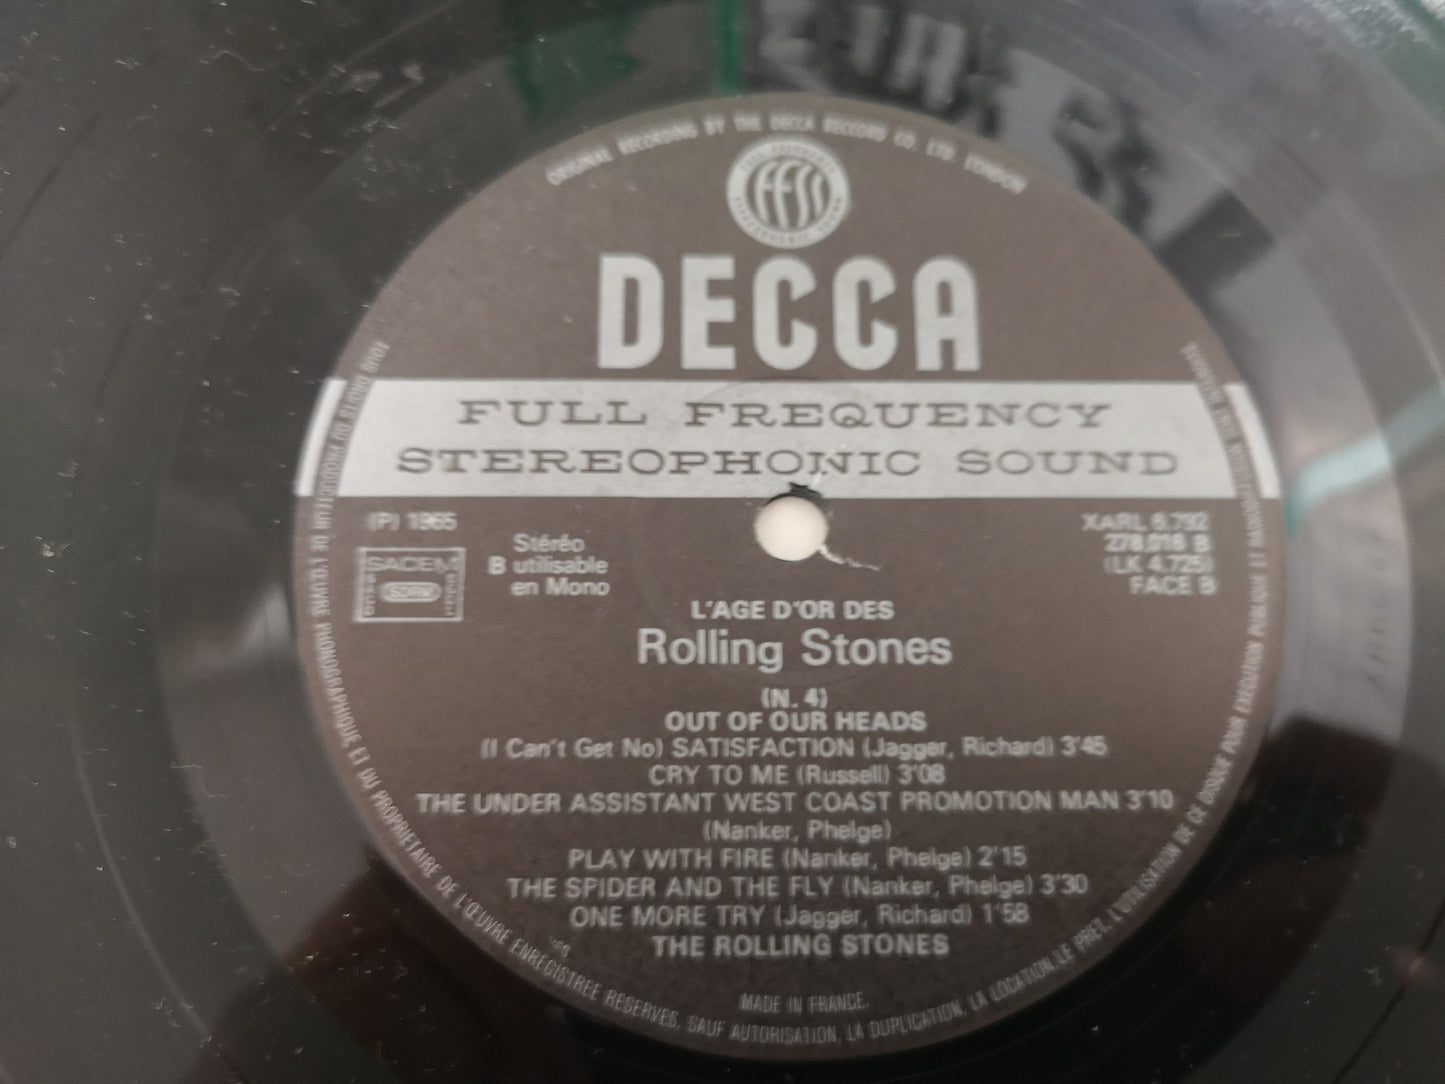 Rolling Stones "L'âge d'Or Vol.4" France 1973 M-/M- (Re of Out of our Heads)